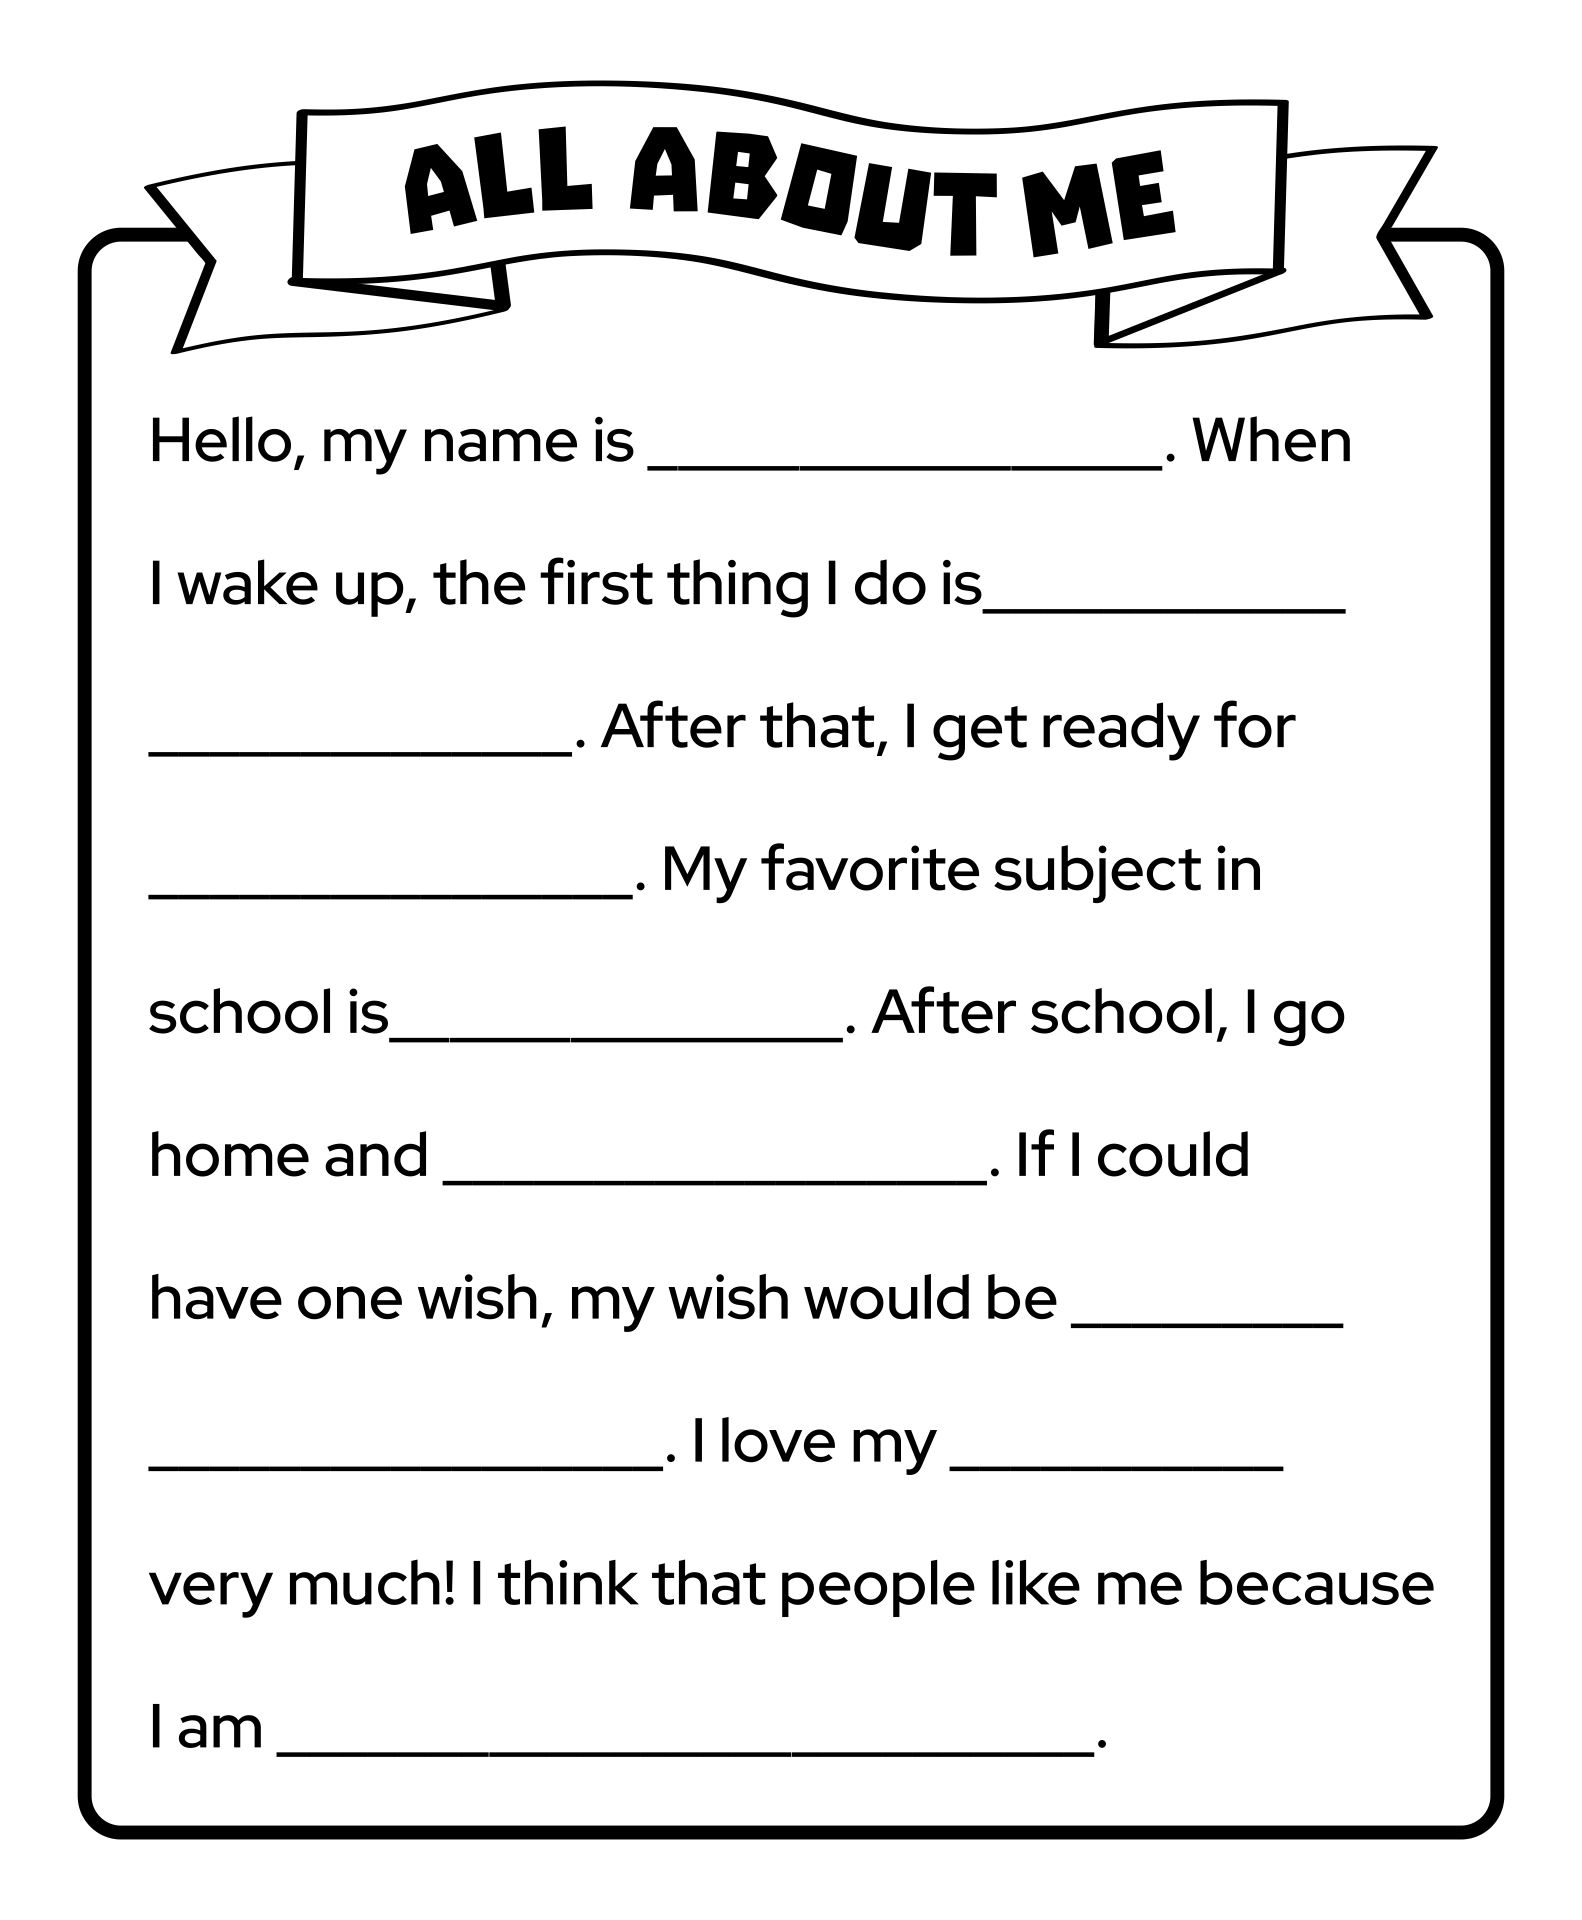 5-best-images-of-printable-worksheets-about-me-adult-back-to-school-worksheets-all-about-me